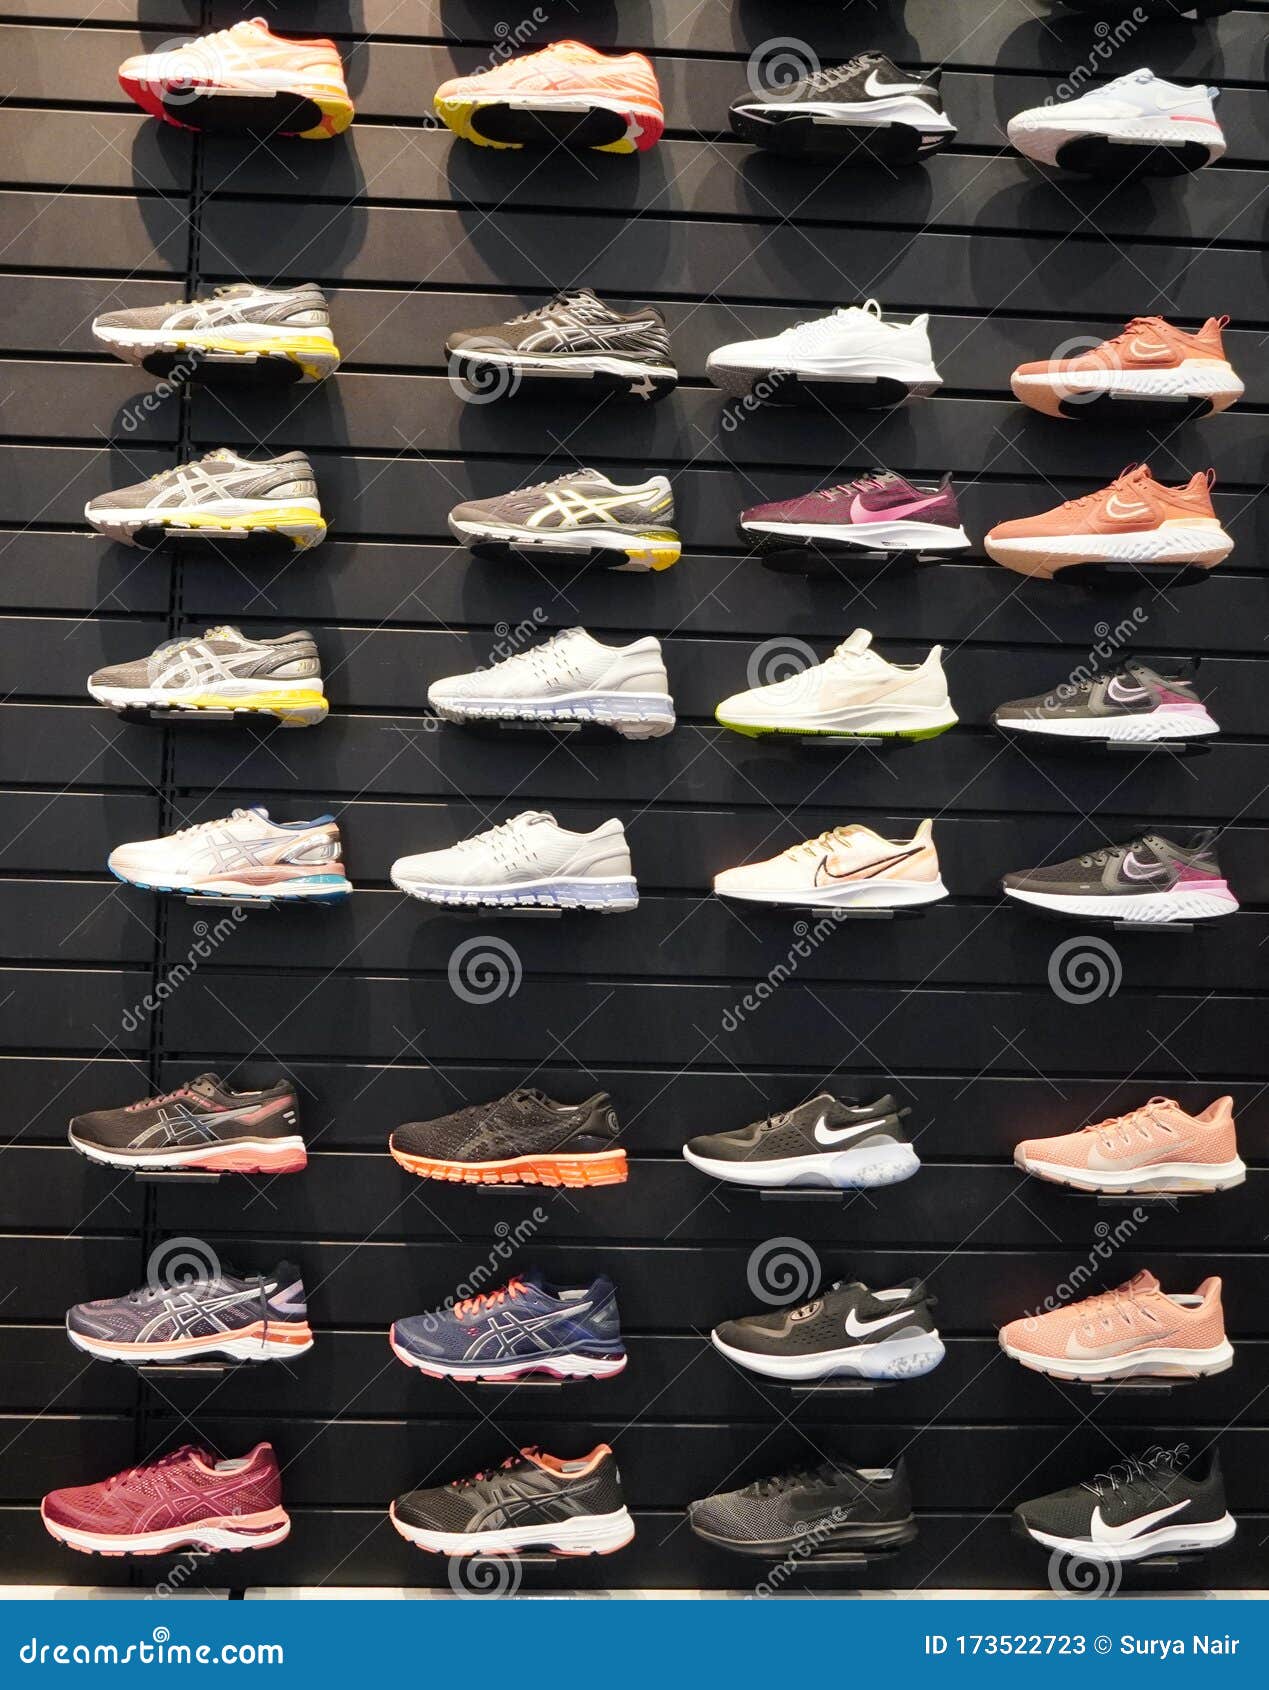 Shop Display of a Lot of Sports Shoes on a Wall. a View of a Wall of ...